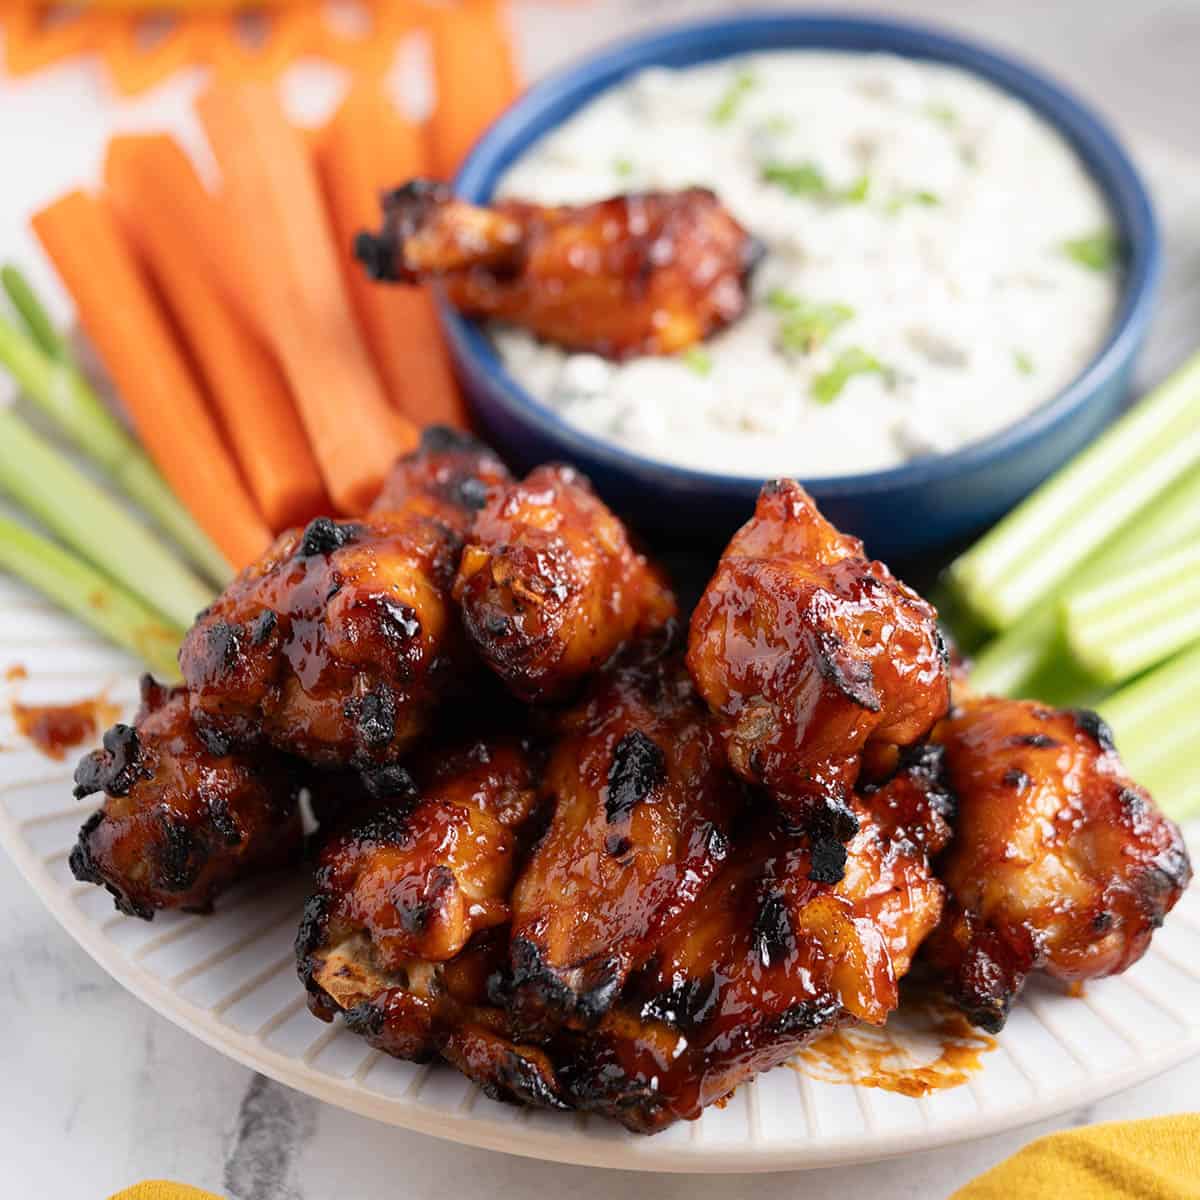 A platter filled with bbq chicken wings, carrots and celery. With dipping sauce.